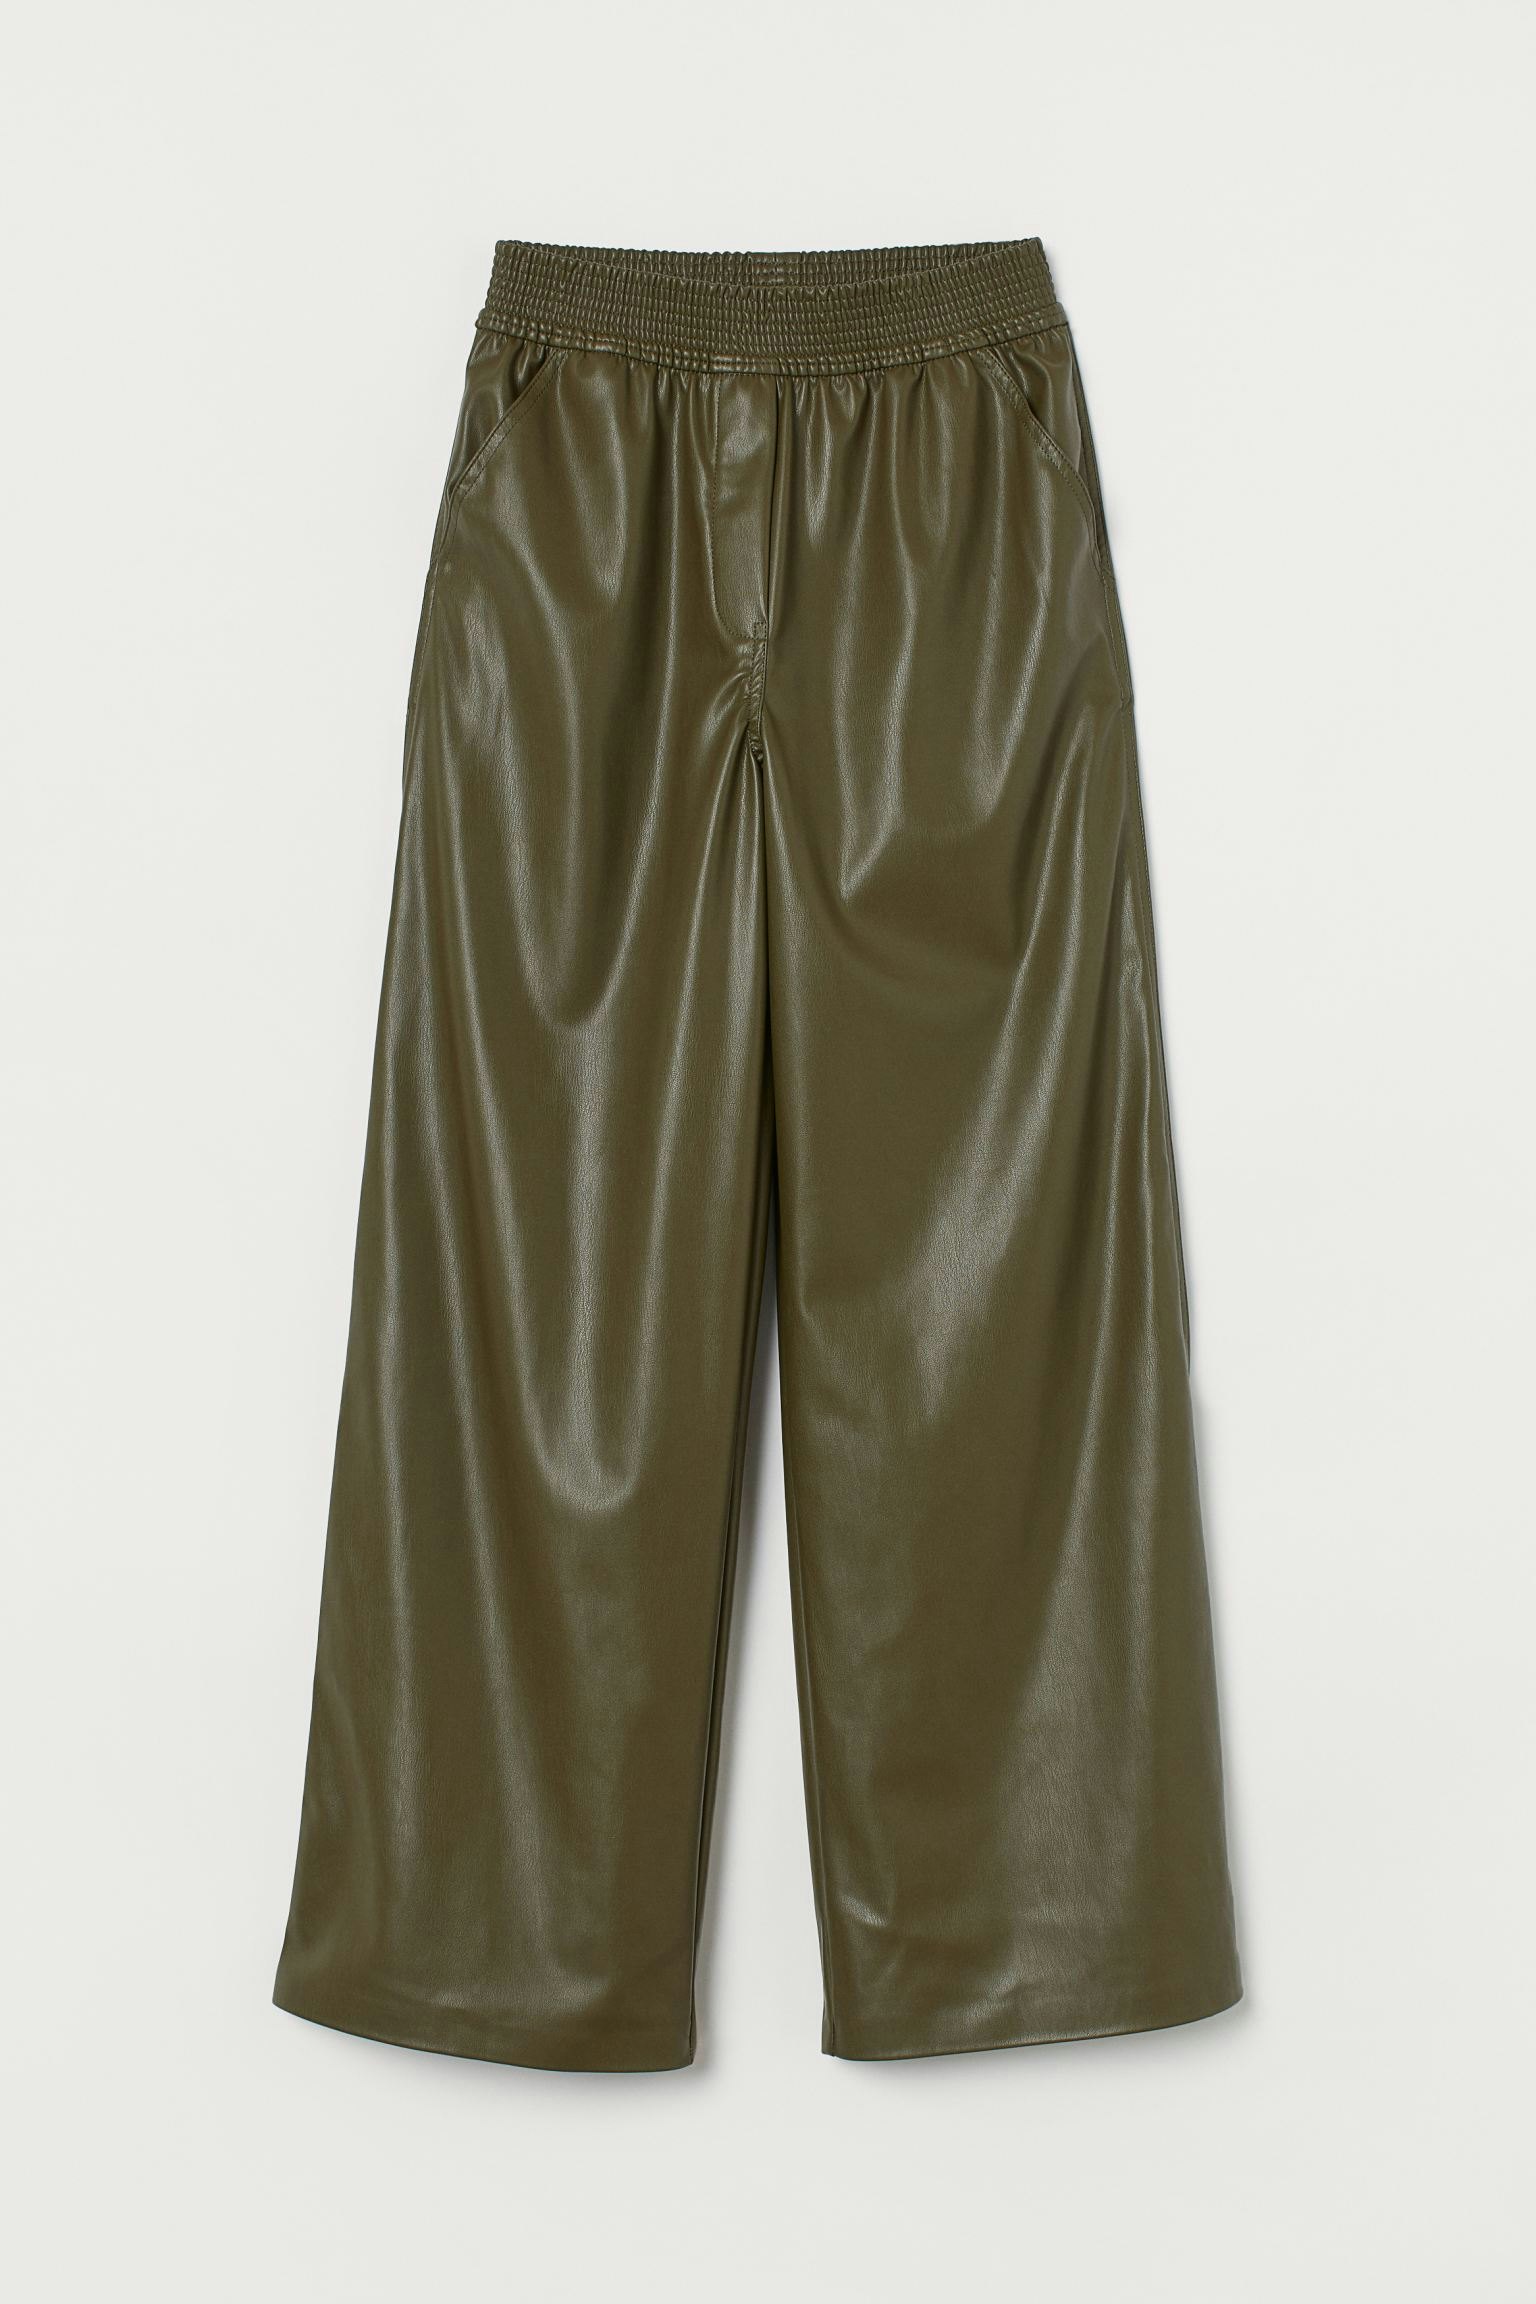 DSC_2669 Army Green leather jogging pants, Zara floral top…